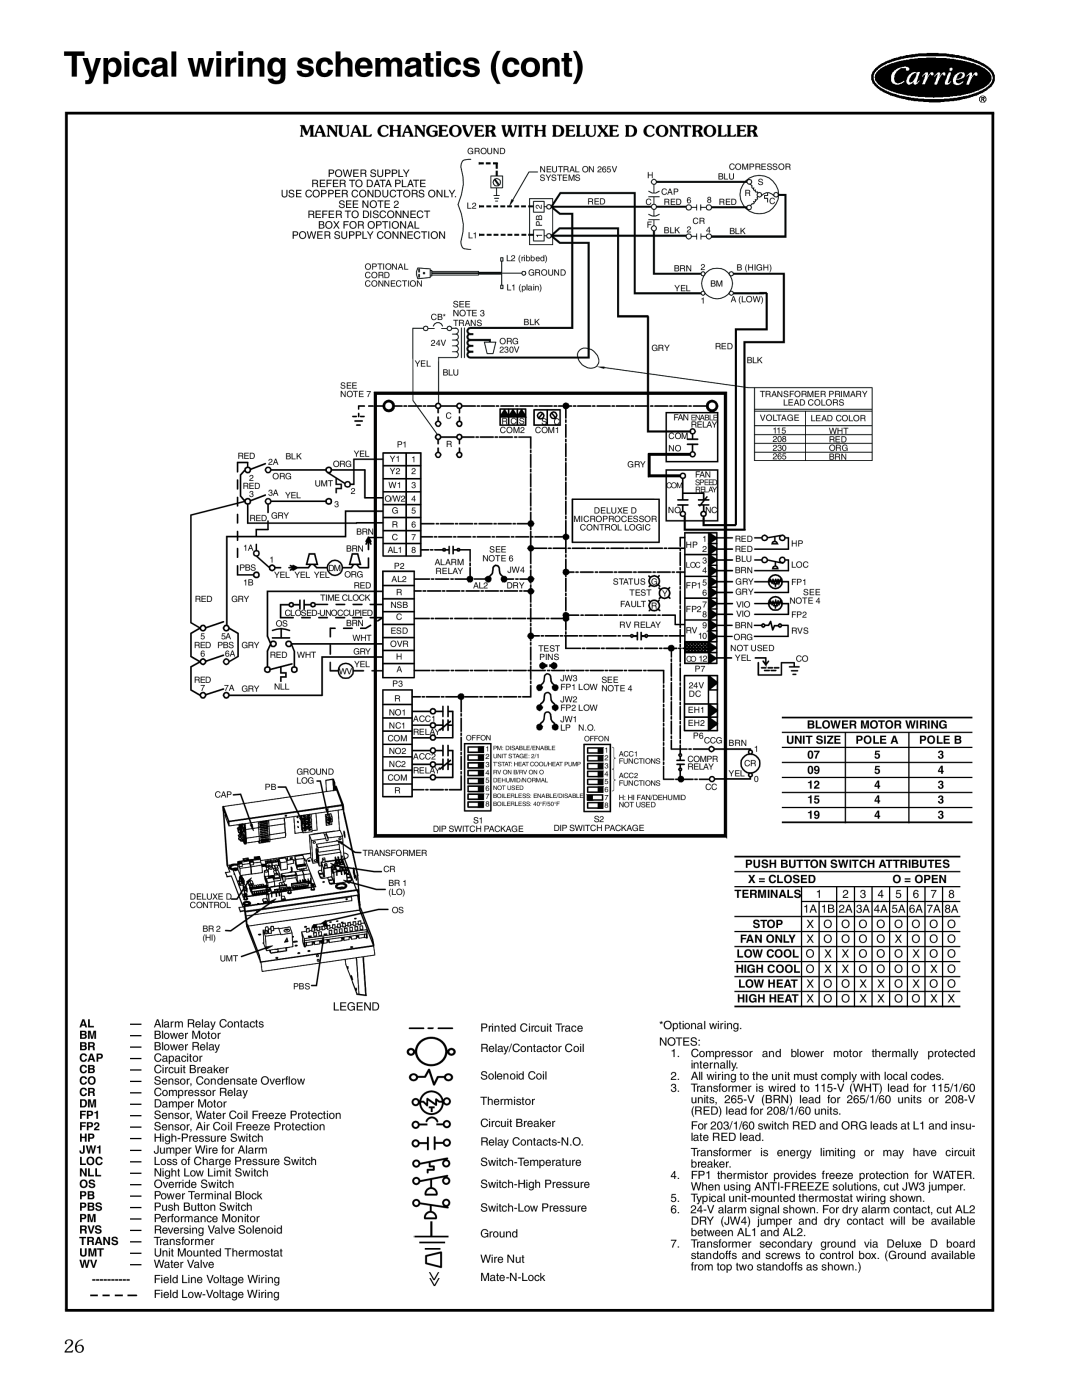 Carrier 50KQL-1PD manual Typical wiring schematics cont, Manual Changeover With Deluxe D Controller 